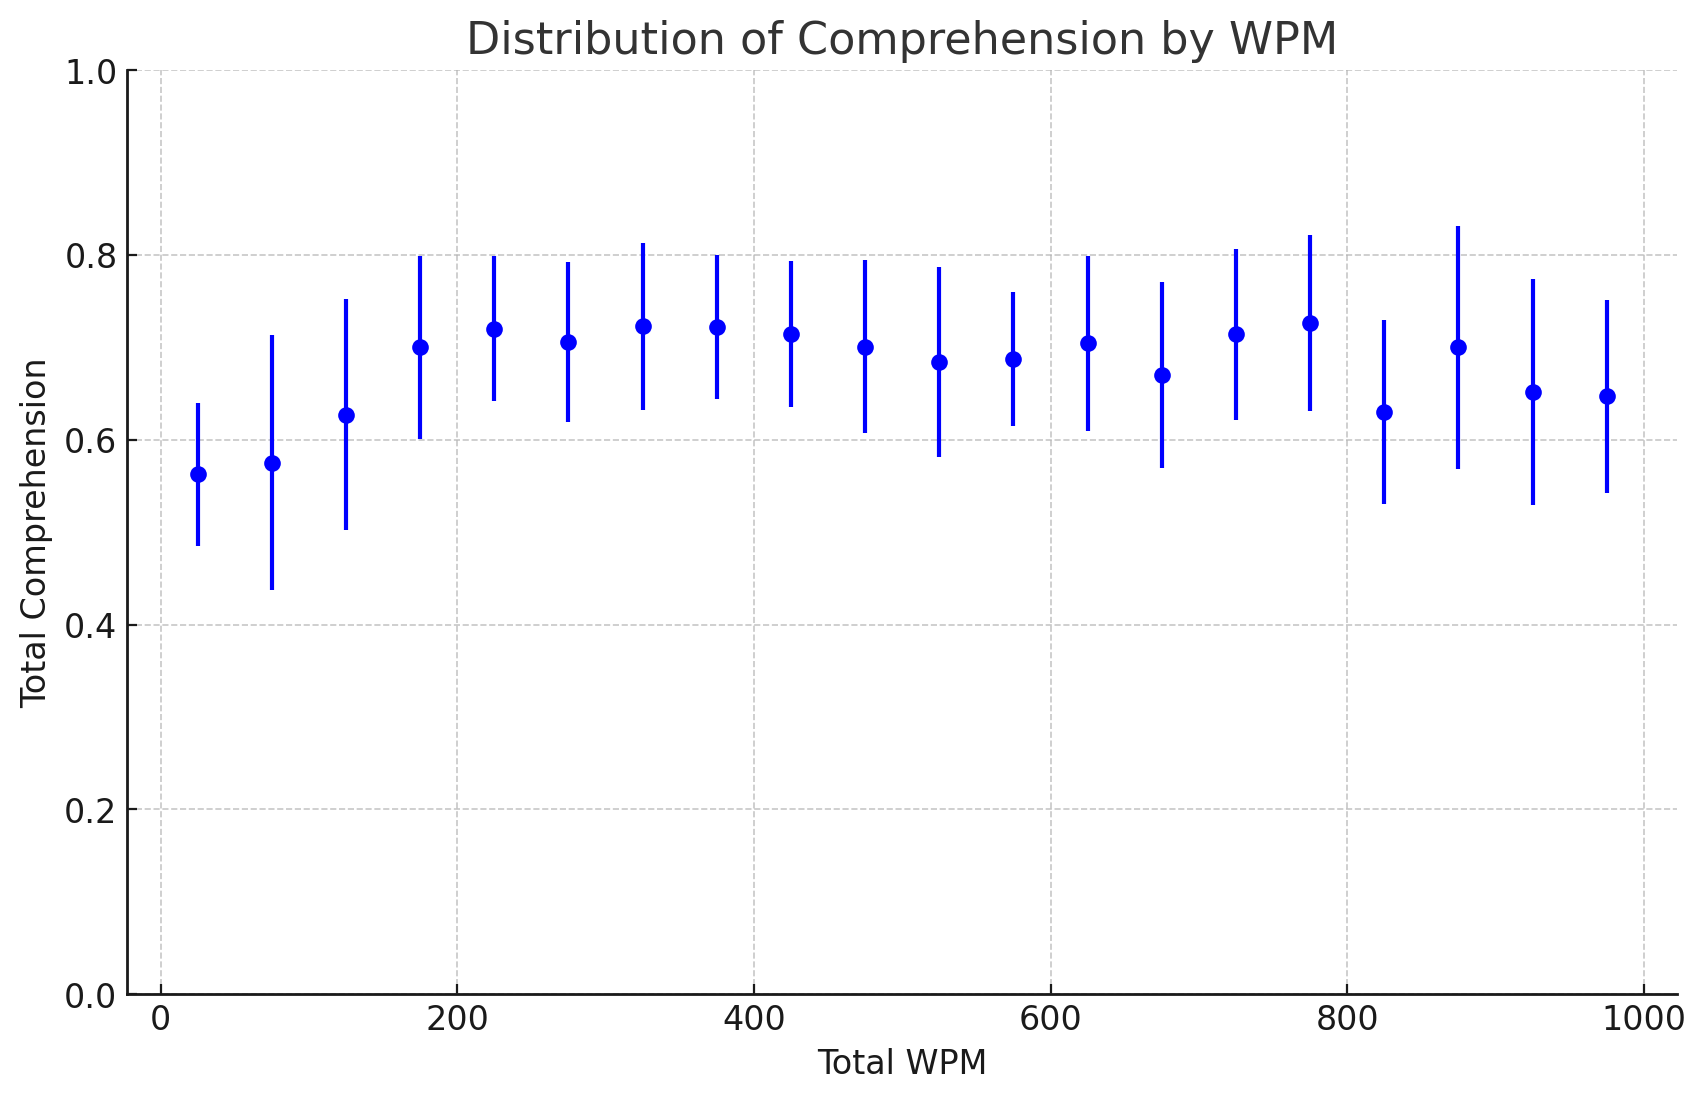 Comprehension levels relatively constant at reading speeds between 200 and 800 WPM